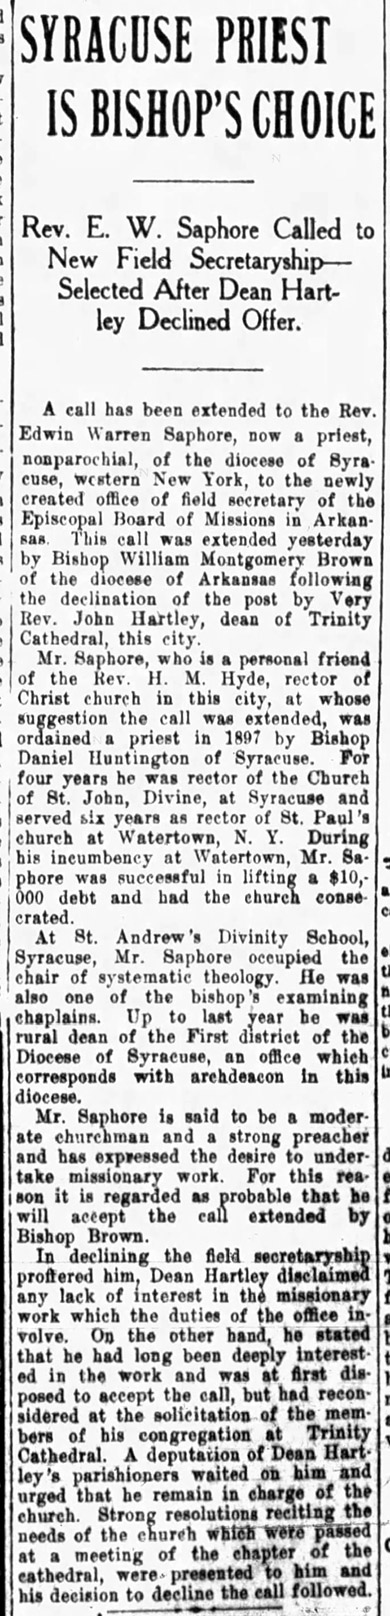 "Syracuse priest is bishop's choice" newspaper clipping